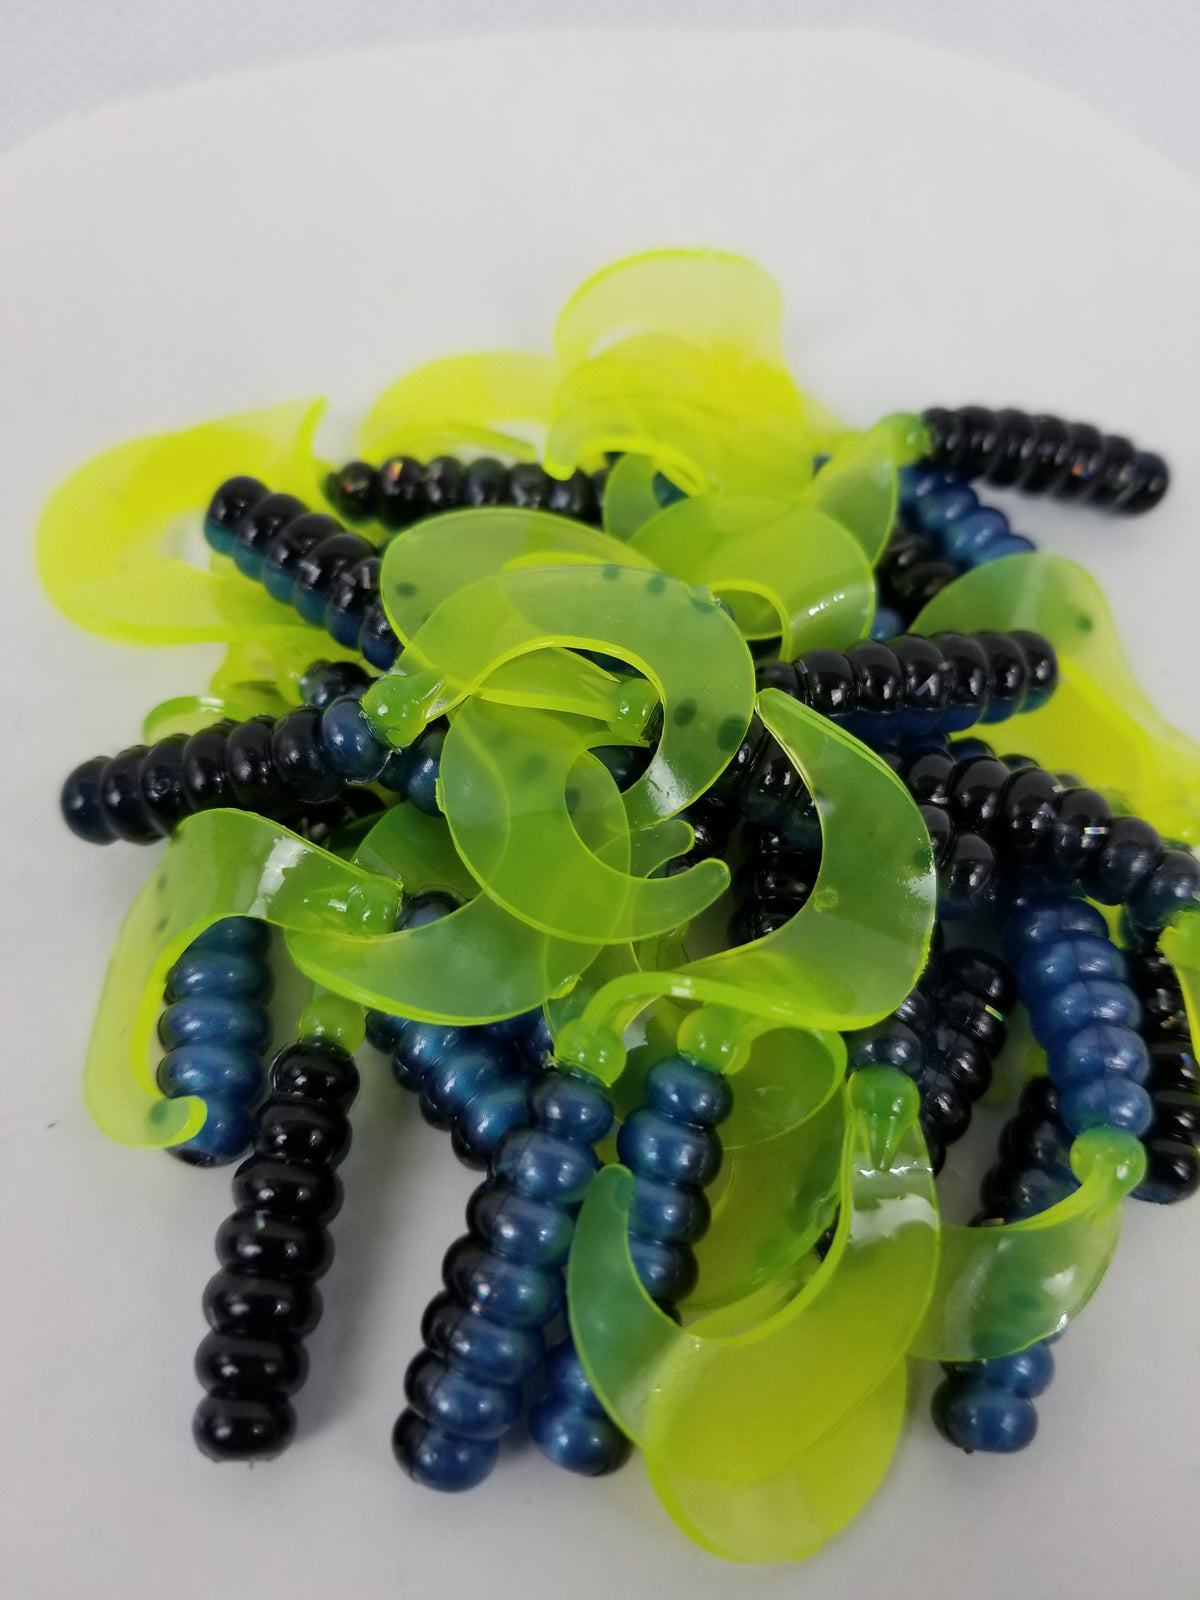 Cam's 2(HOLOGRAM FLAKE) Curly Tail Grub 40pc Blue Black & Chartreuse Curly  Tail Crappie Soft Jigs [A Cam's Exclusive]